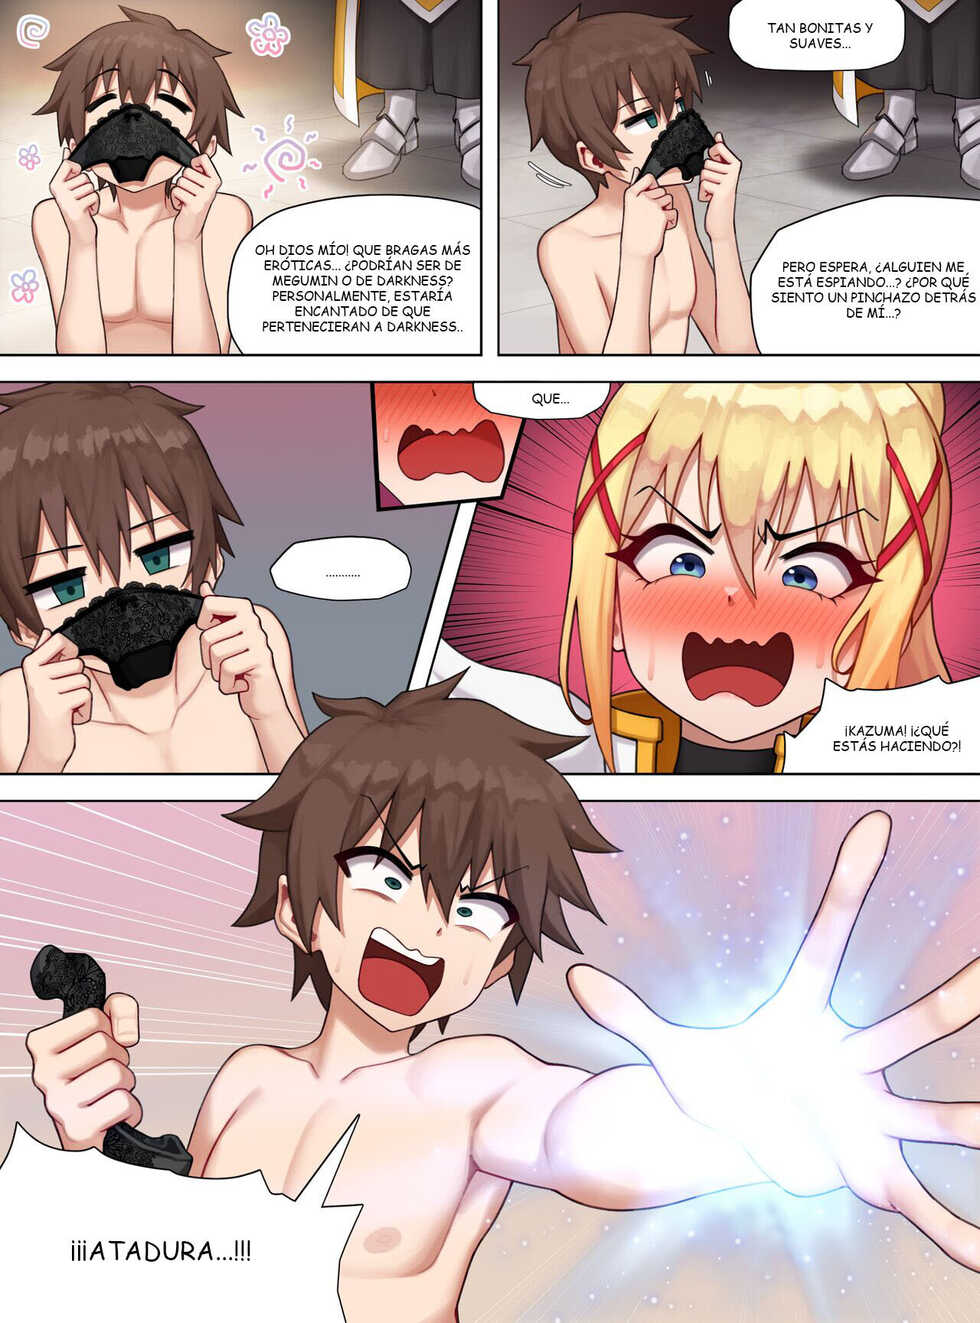 [PoPer] Lalatina: Ass Spanking on this Lusty Cum Fountain[Spanish] [traductor200] - Page 3